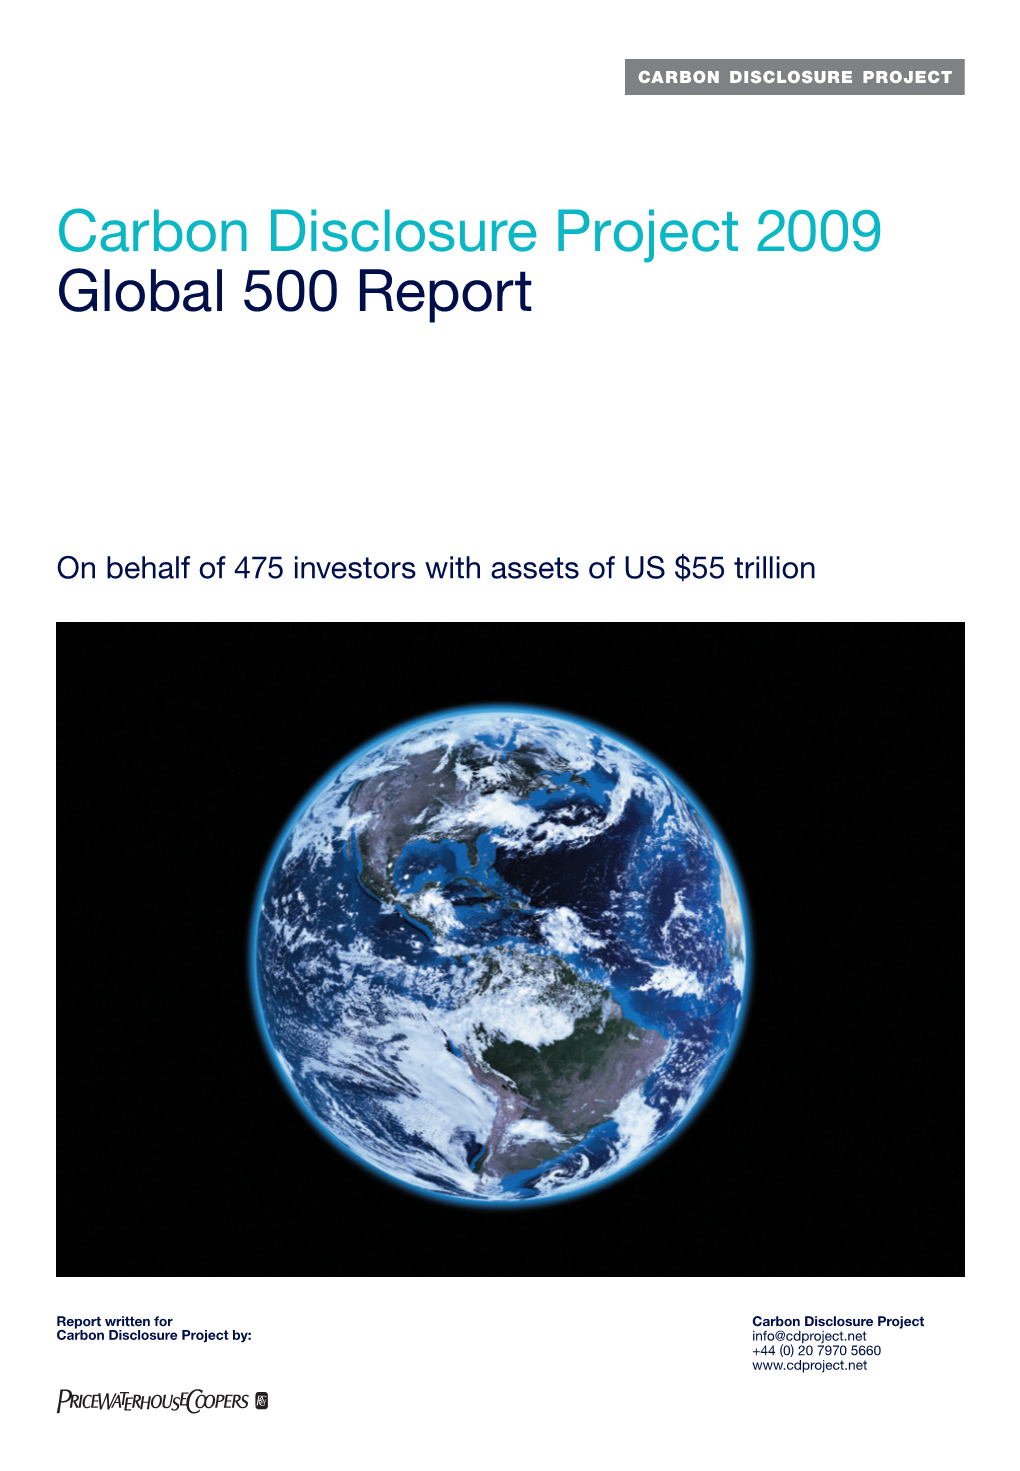 Carbon Disclosure Project 2009 Global 500 Report